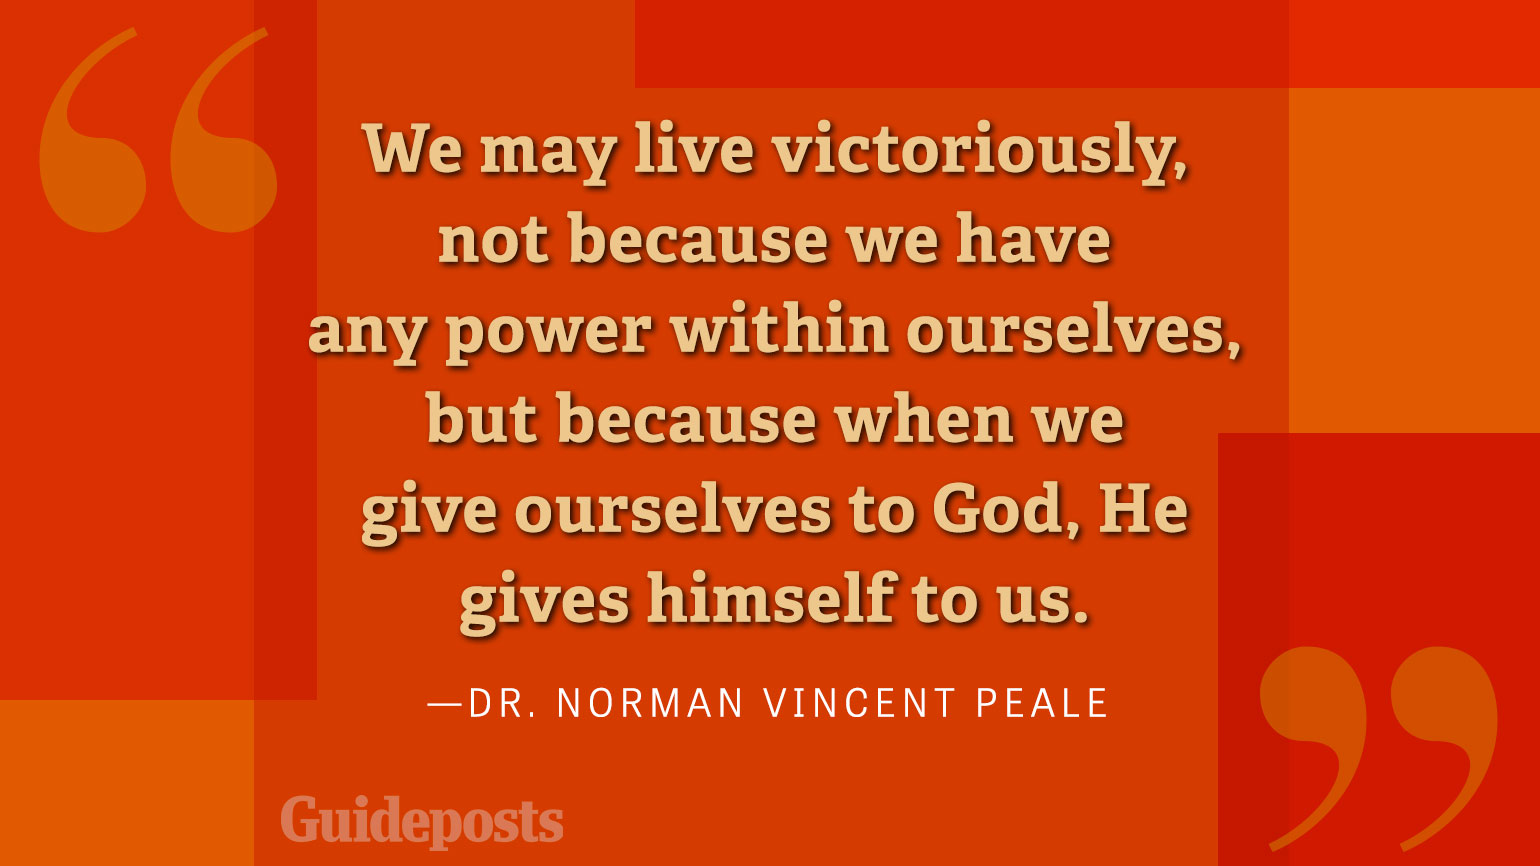 We may live victoriously, not because we have any power within ourselves, but because when we give ourselves to God, He Gives himself to us.